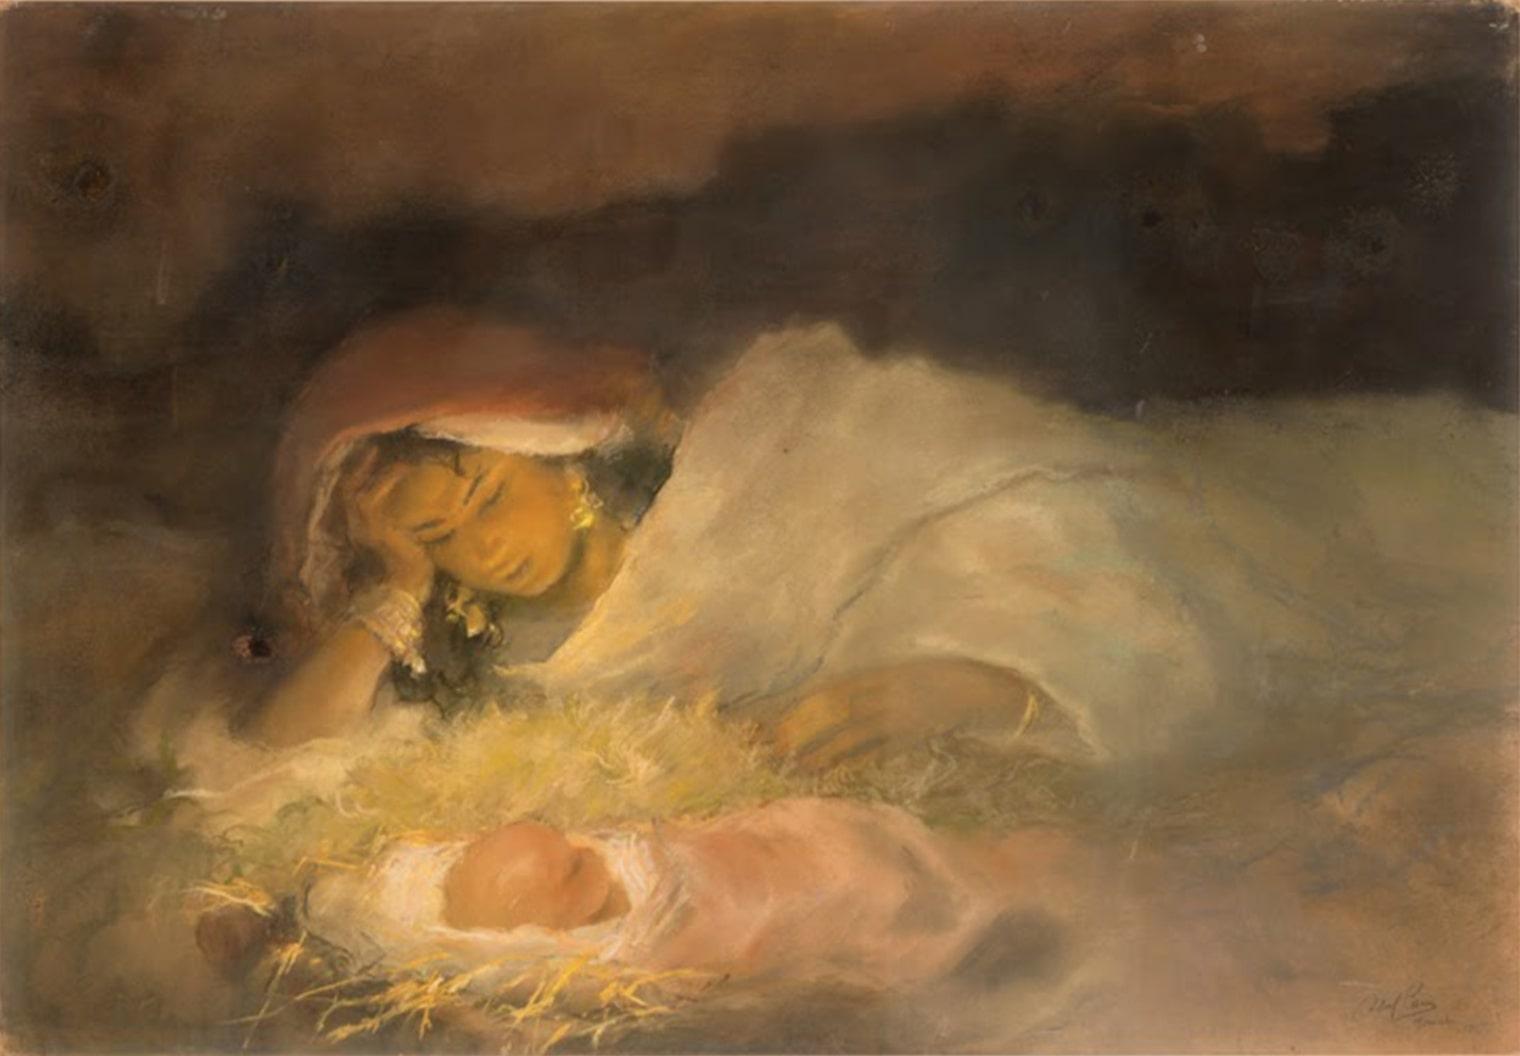 Painting of woman lying down, with her head propped up by her hand as she watches the baby lying next to her.